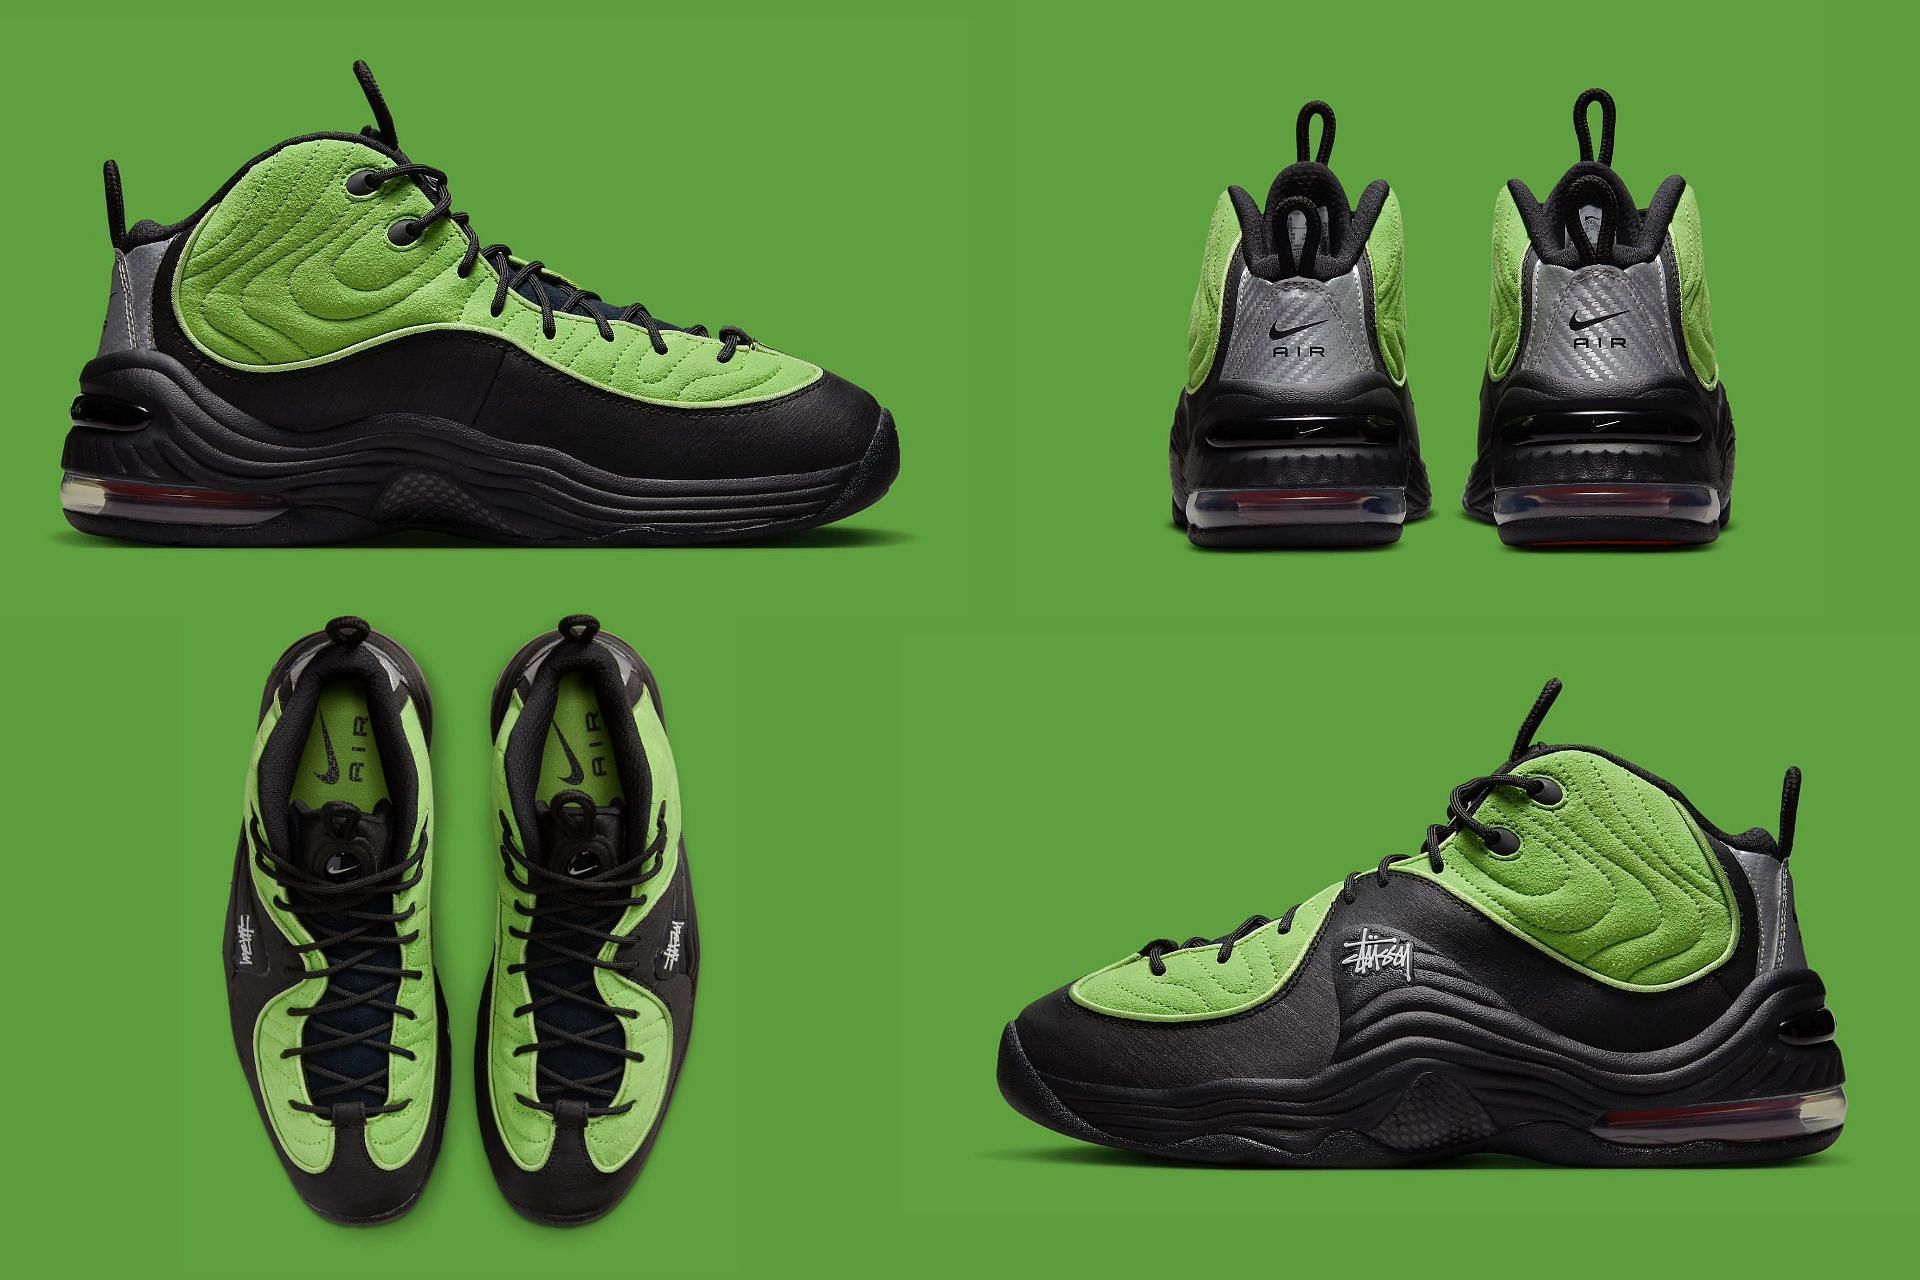 Where to buy Stussy x Nike Air Max Penny 2 “Black/Green” shoes? Price and more details explored